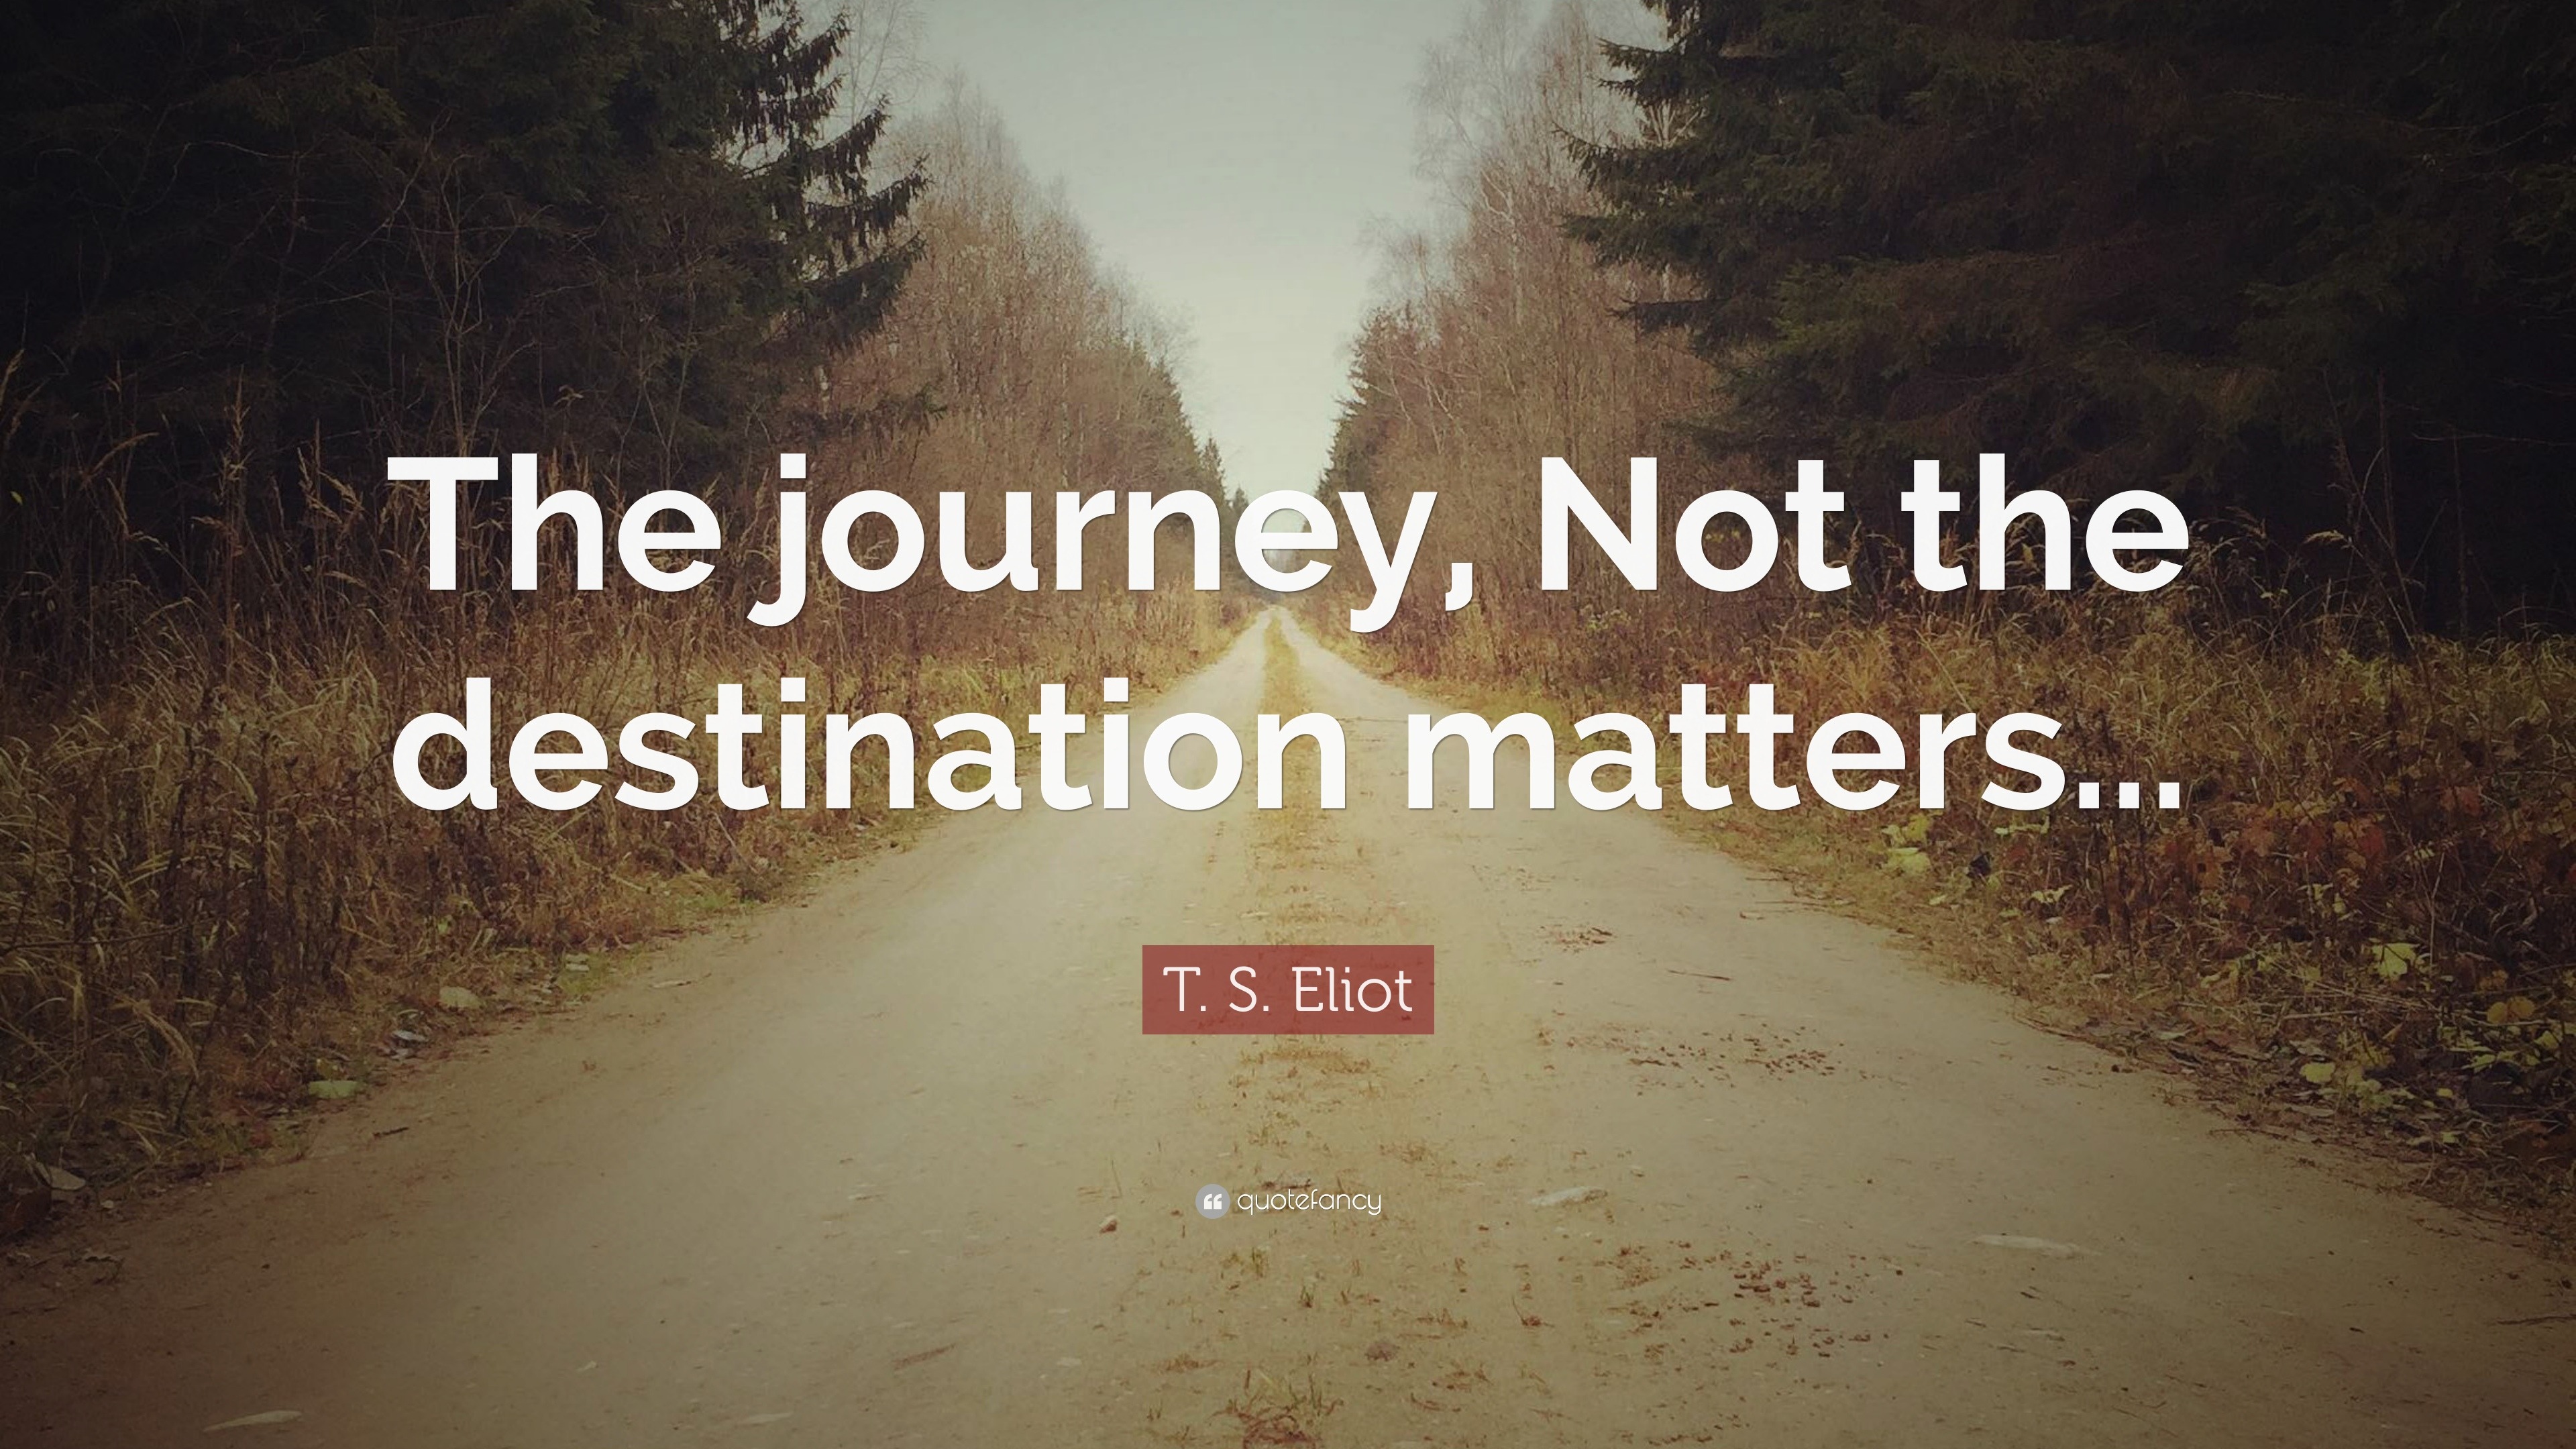 quote about journey matters